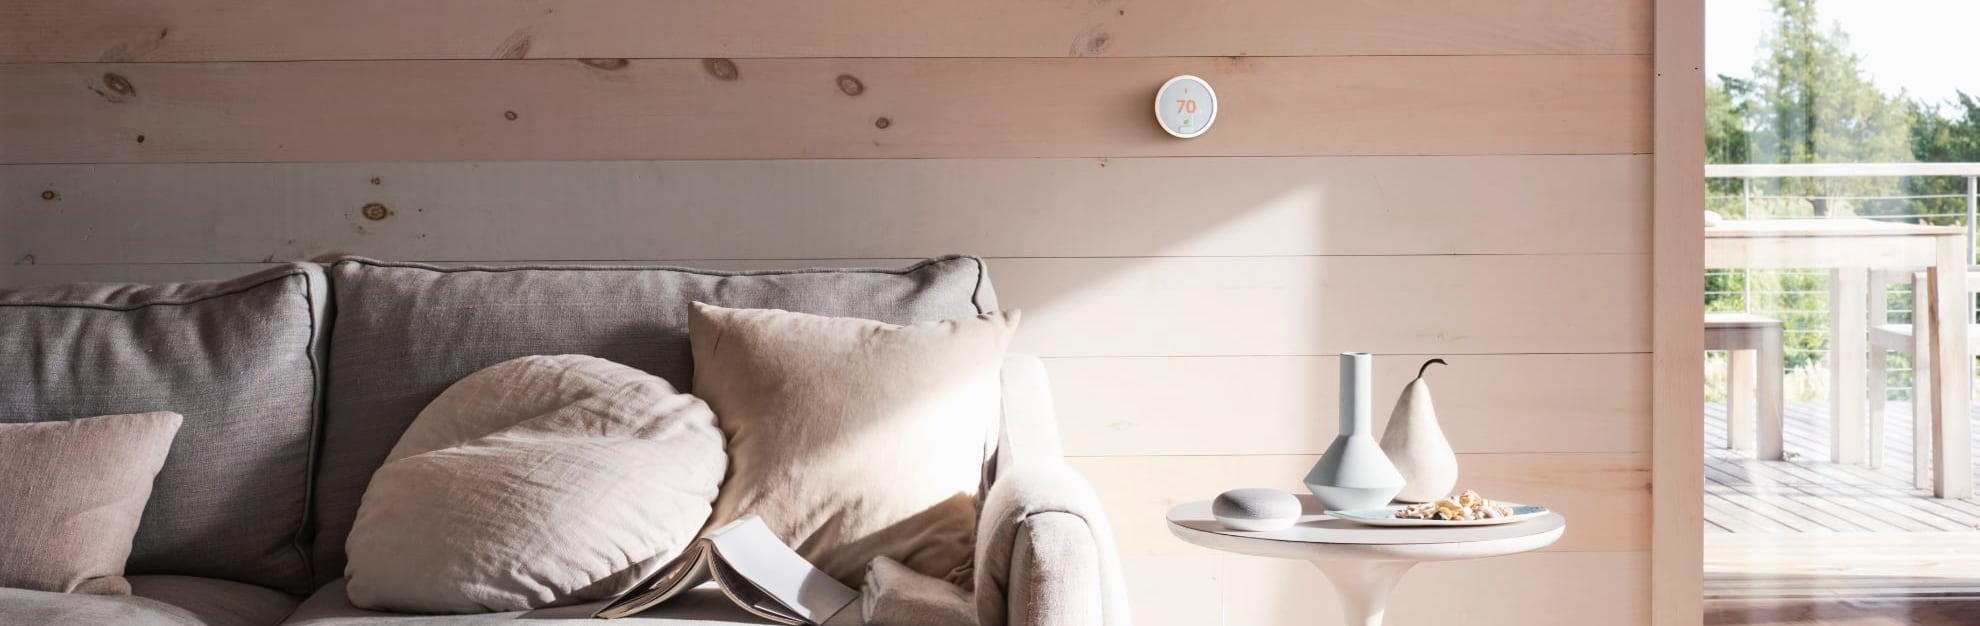 Vivint Home Automation in Kennewick